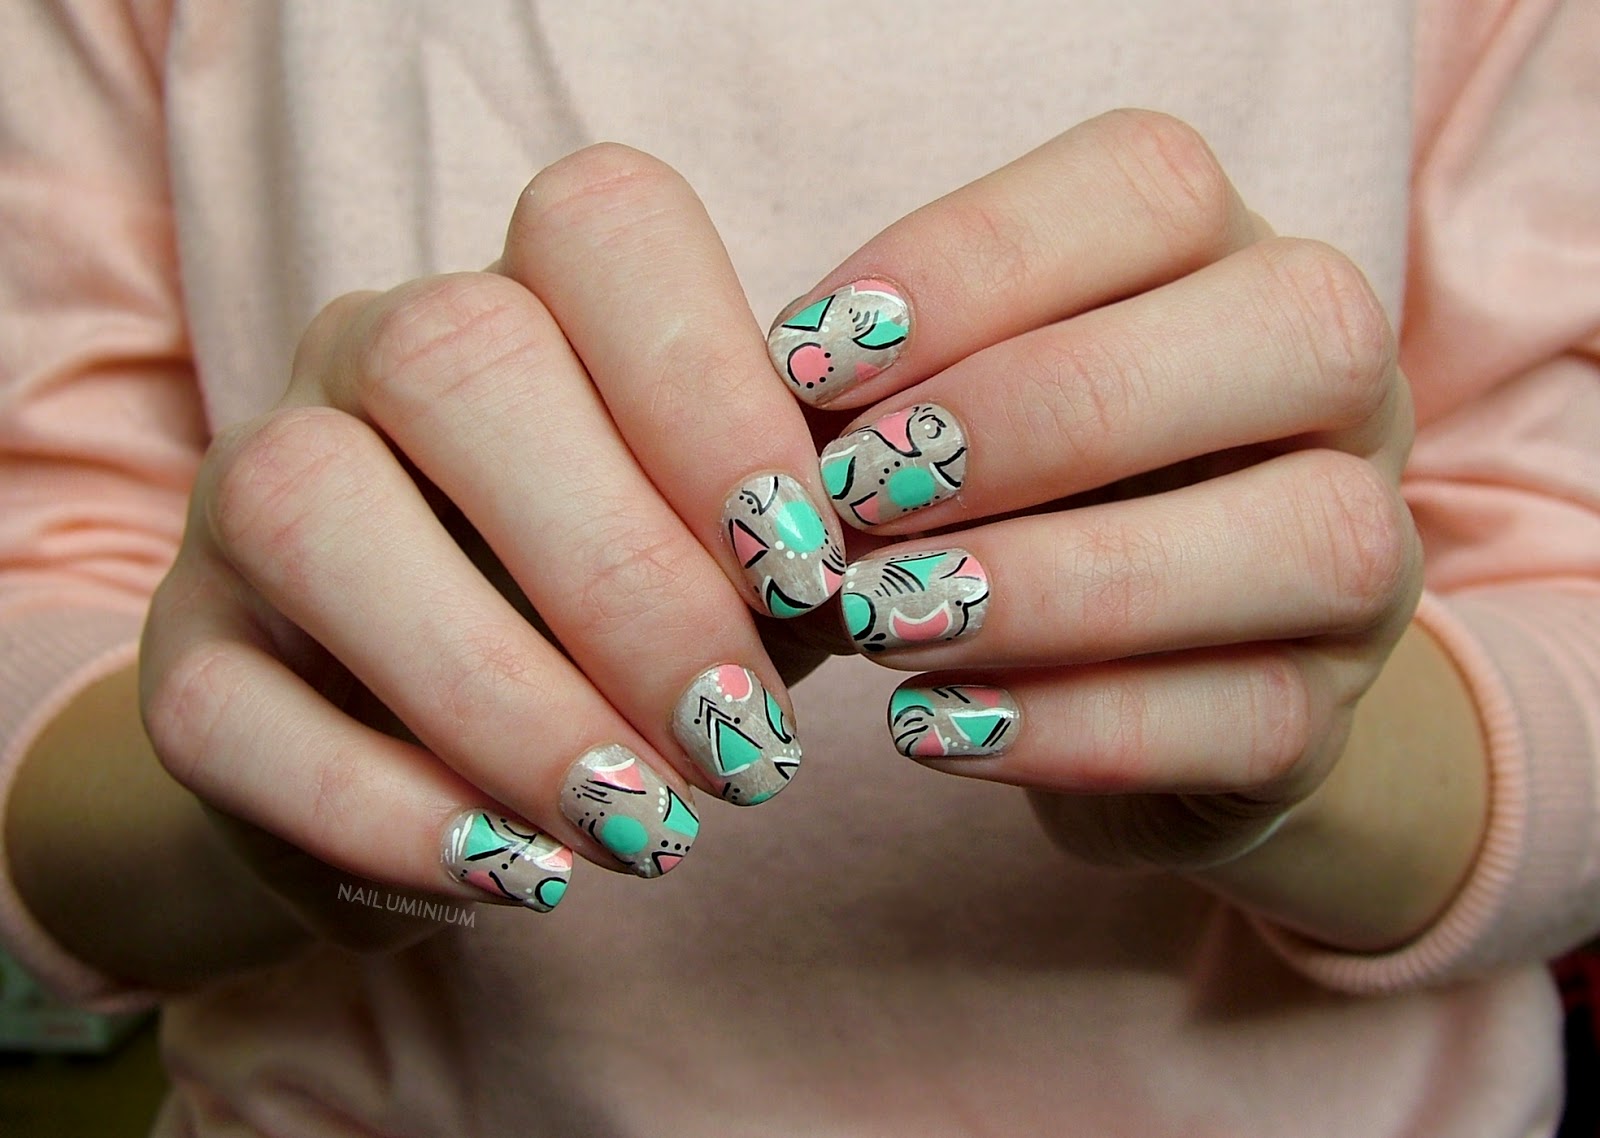 7. "Abstract Nail Art for 2024" - wide 10